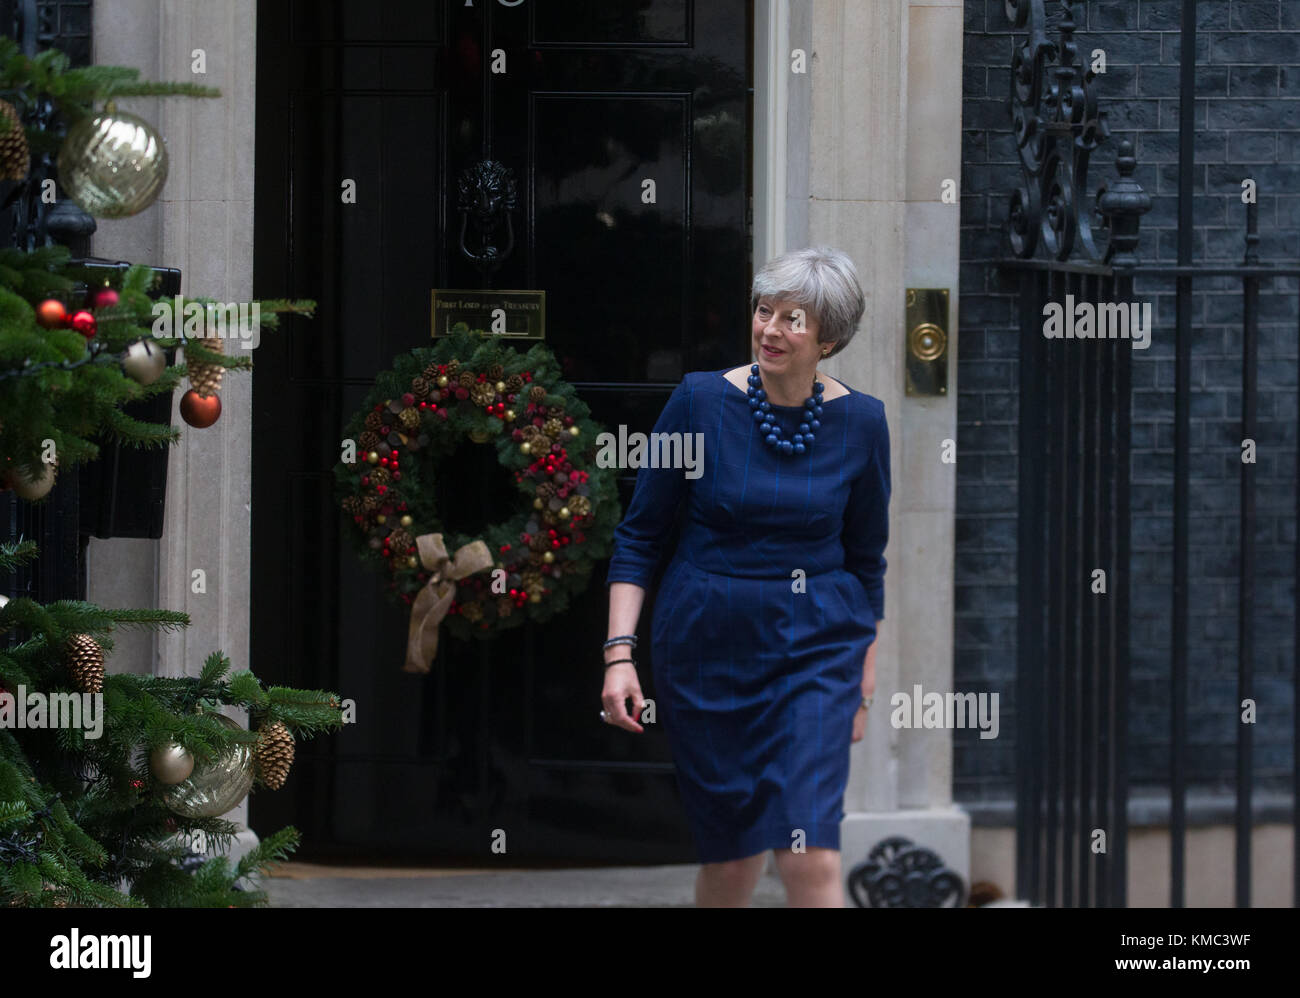 British Prime Minister, Theresa May, leaves 10 Downing Street to meet Mariano Rajoy, Prime Minister of Spain for talks at 10 Downing Street Stock Photo